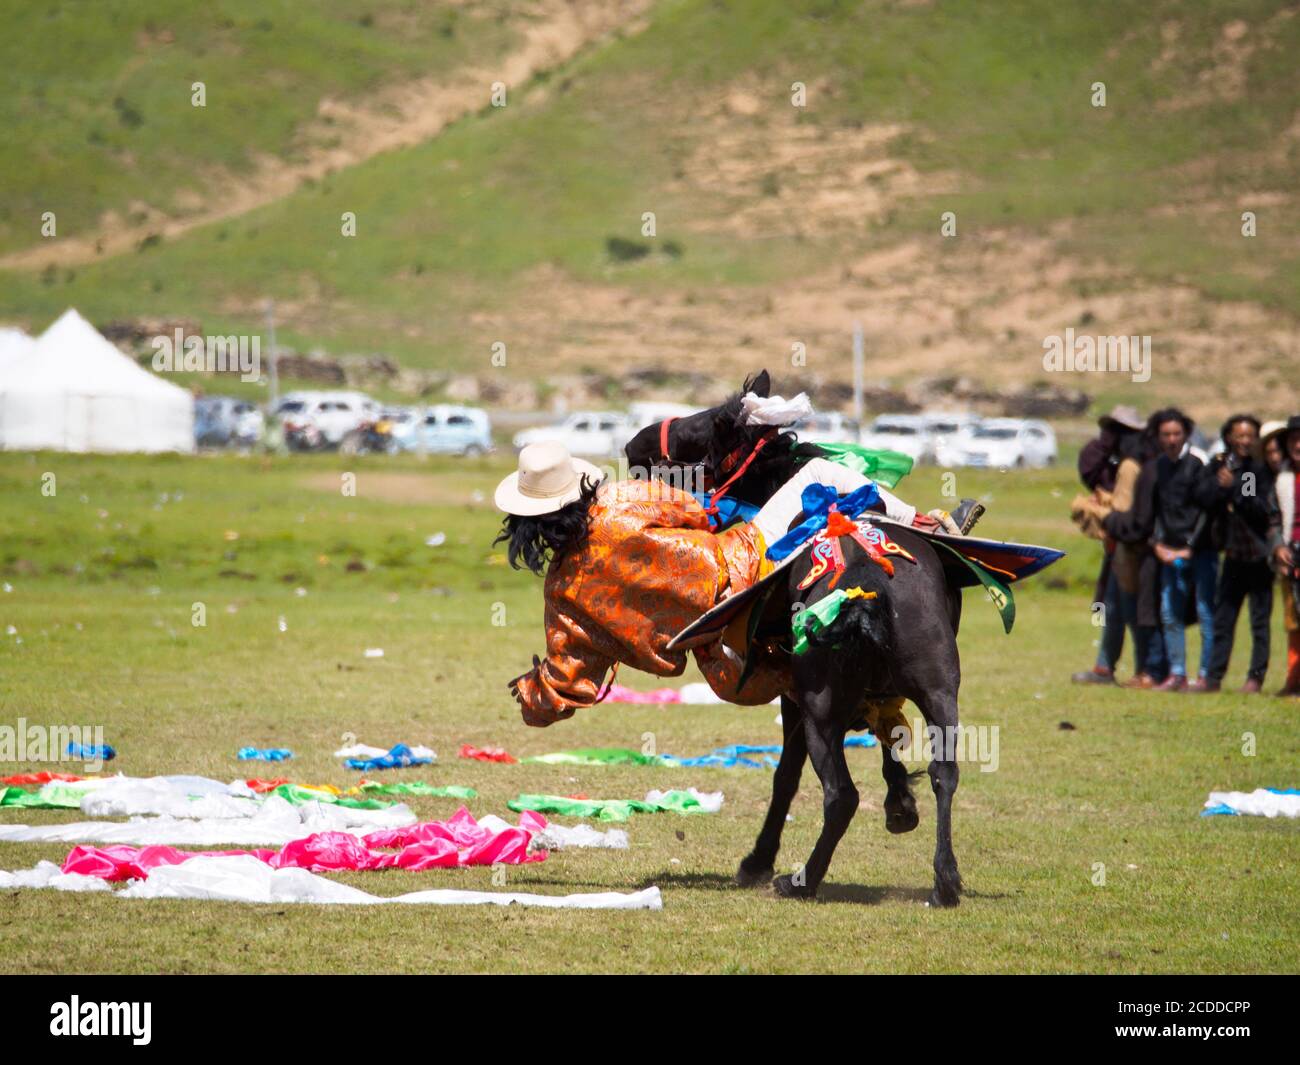 A Khampa man is trying to pick up cloths on the ground while riding his horse, a part of the racing in the horse festival near Litang City. Stock Photo